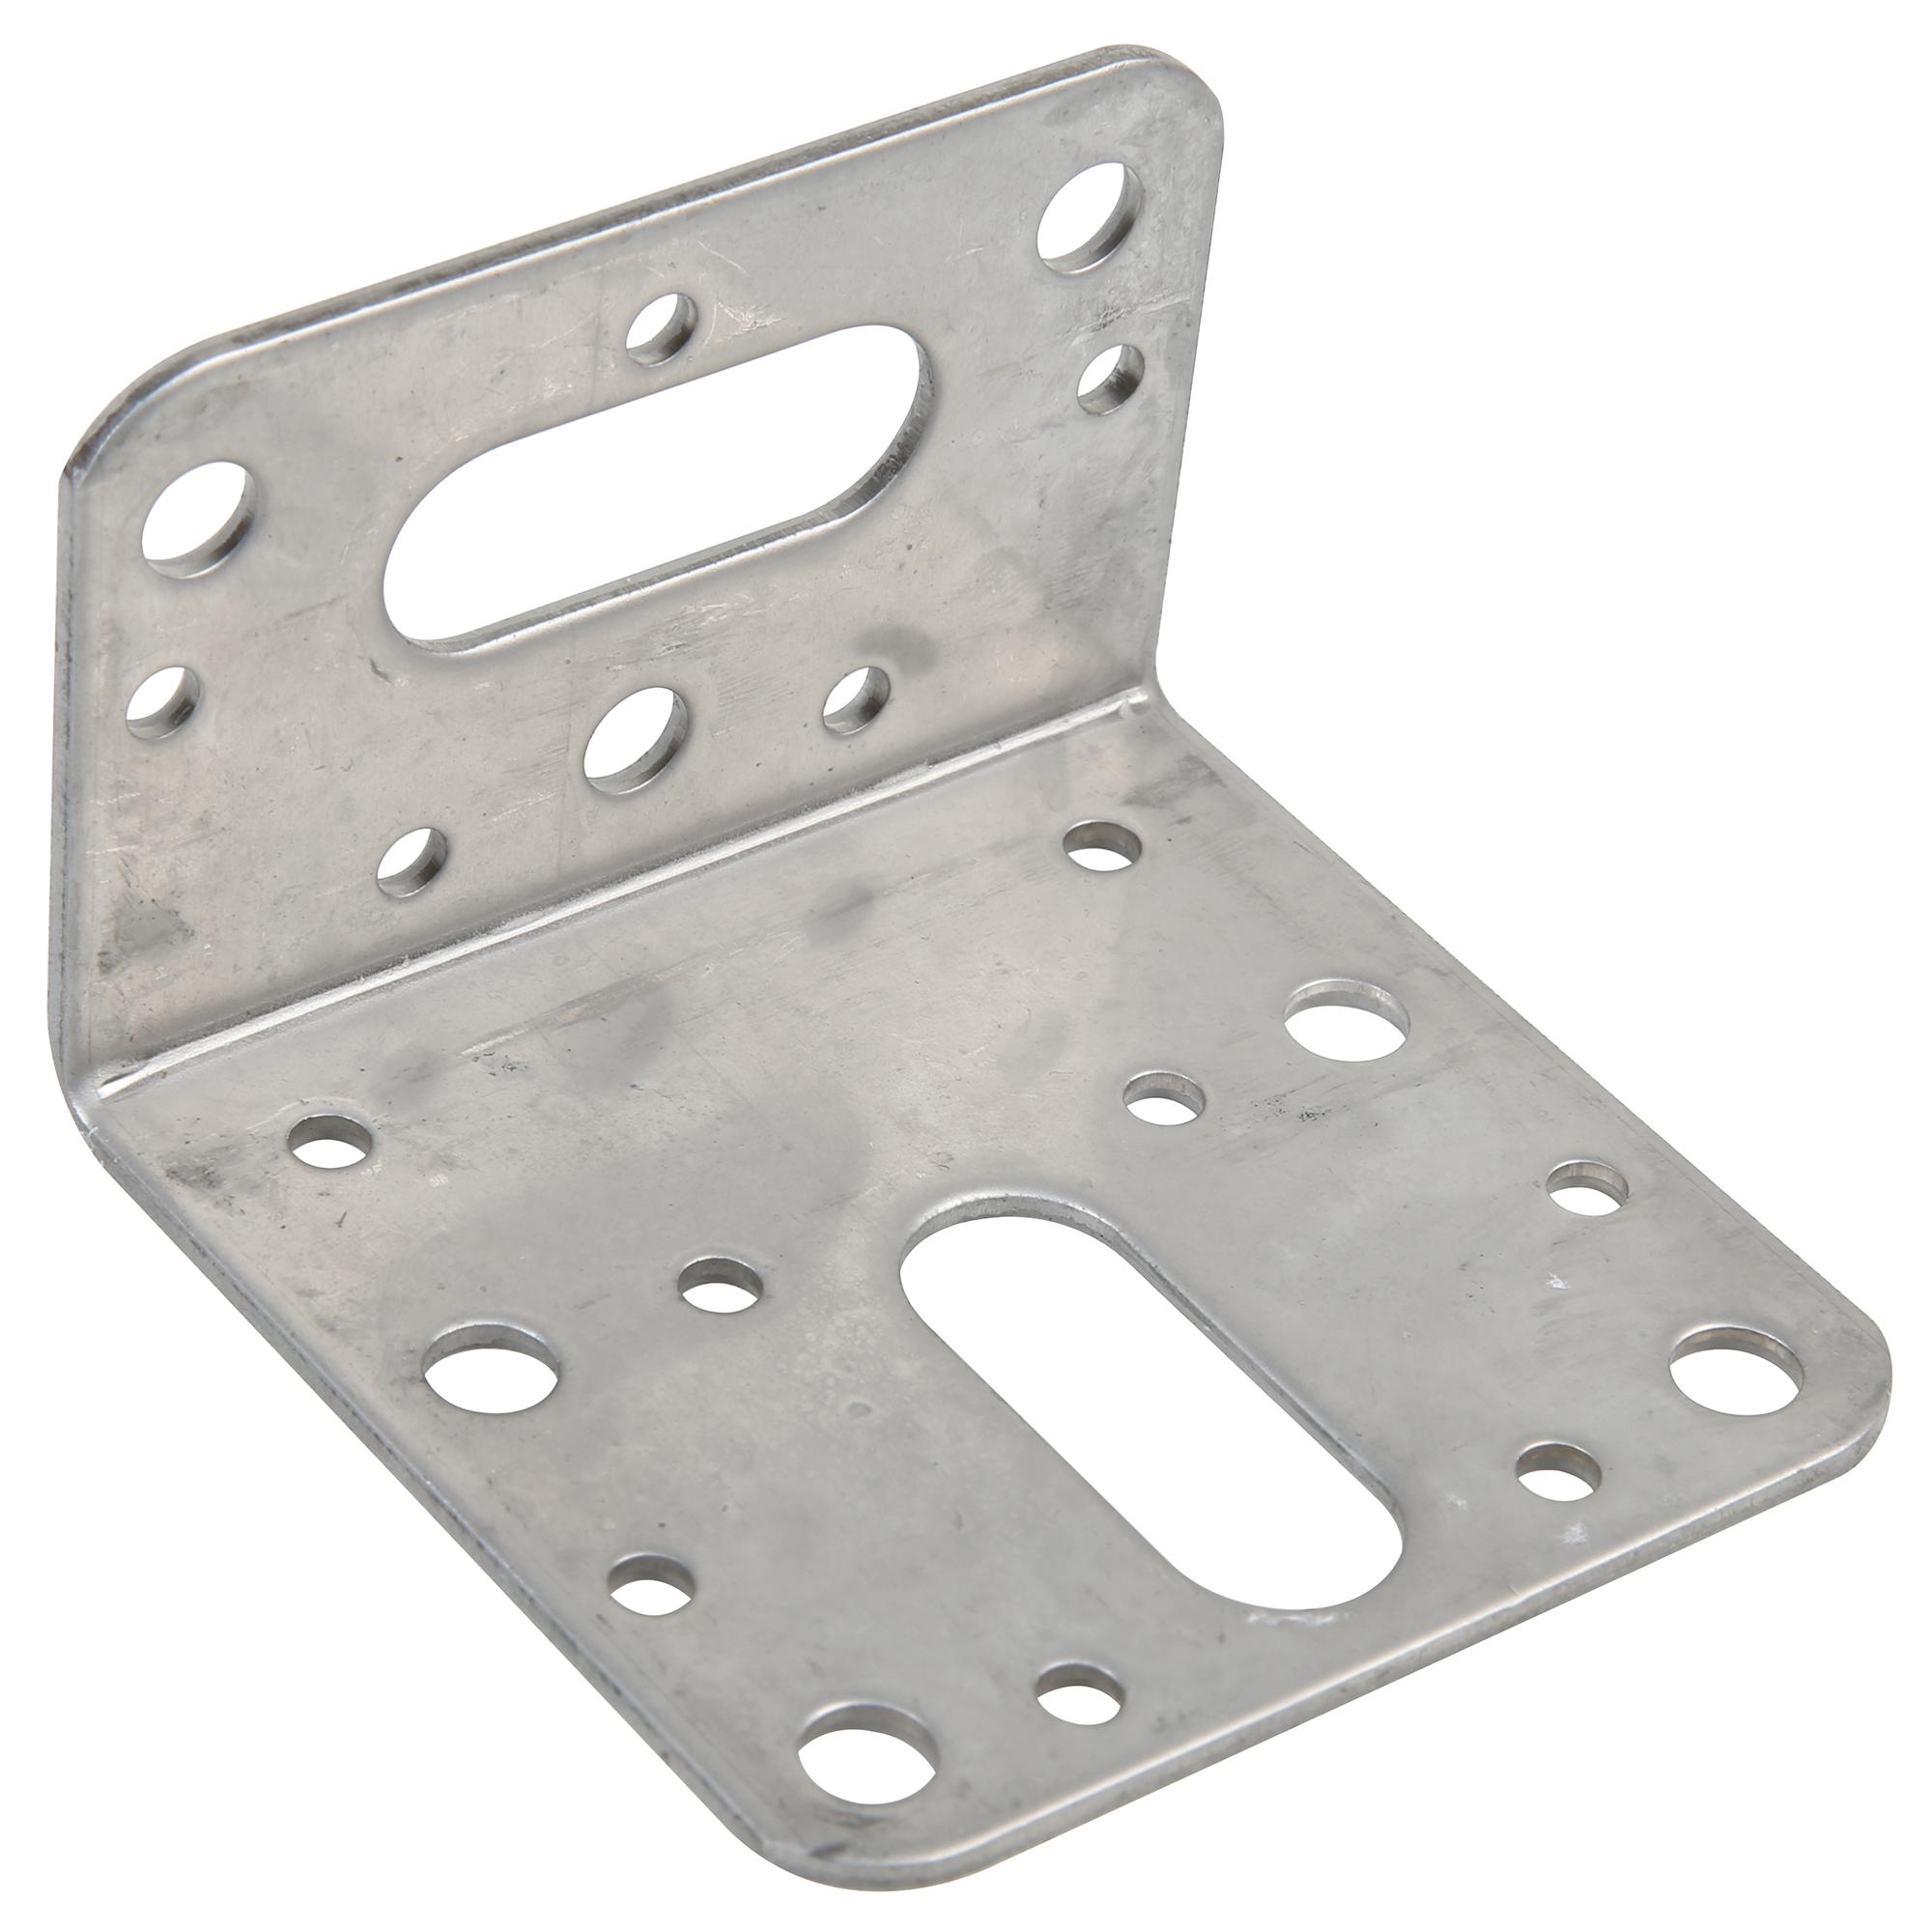 Timco 6040Abs Angle Bracket Stainless S - 60X40mm